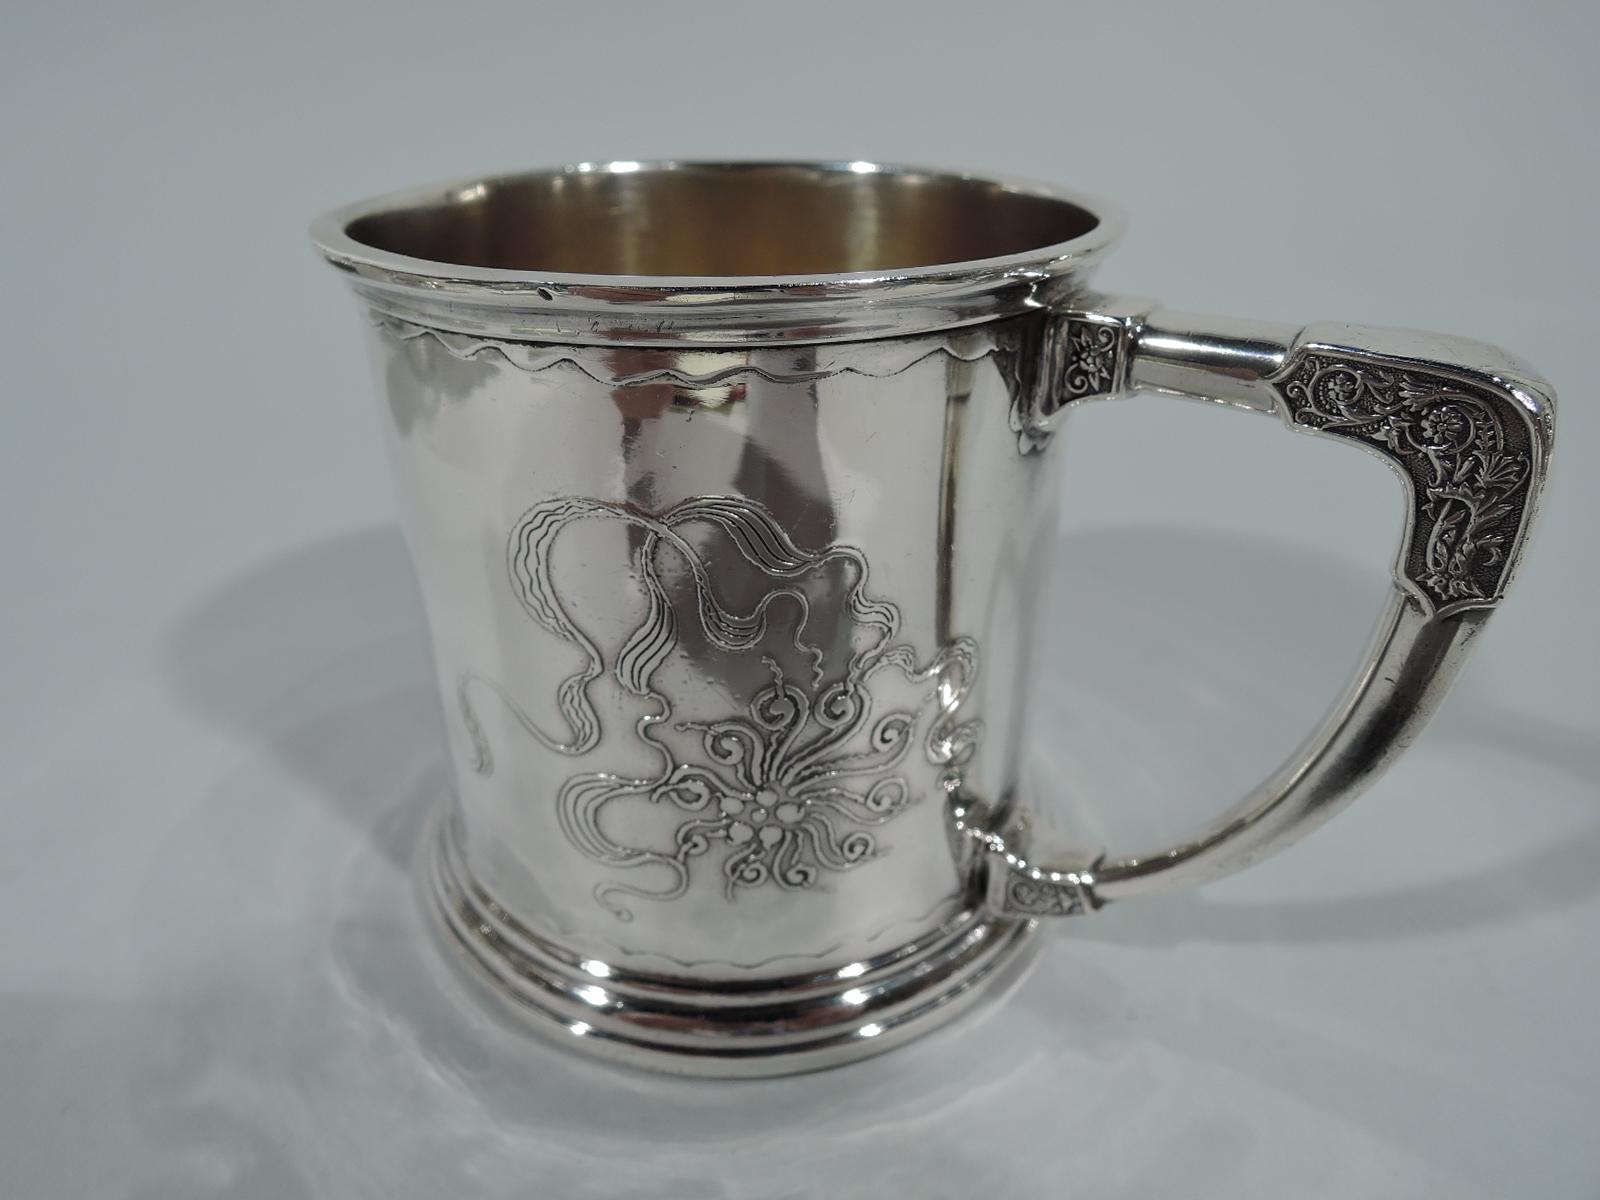 Stylistically advanced Art Nouveau sterling silver baby cup. Made by Whiting in New York, circa 1900. Drum form with spread foot and scroll bracket handle. Stylized and fluid acid-etched ornament with flowers and ribbon between scalloped borders. An